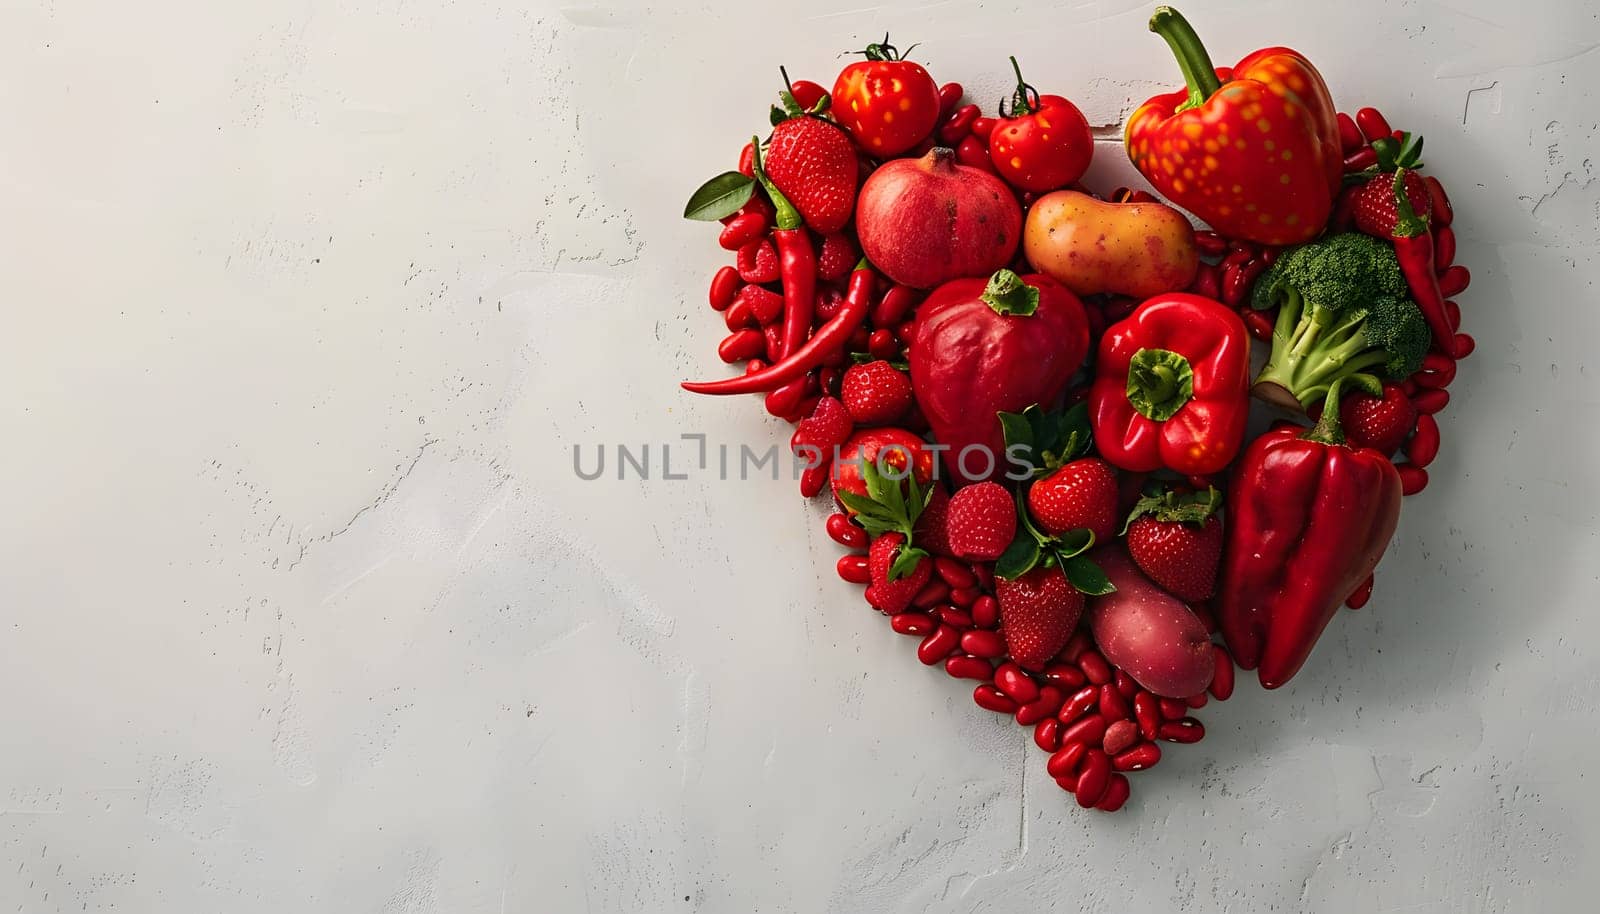 A heartshaped arrangement of red fruits and vegetables, showcasing the natural beauty of seedless fruit, berries, and plantbased ingredients on a white surface